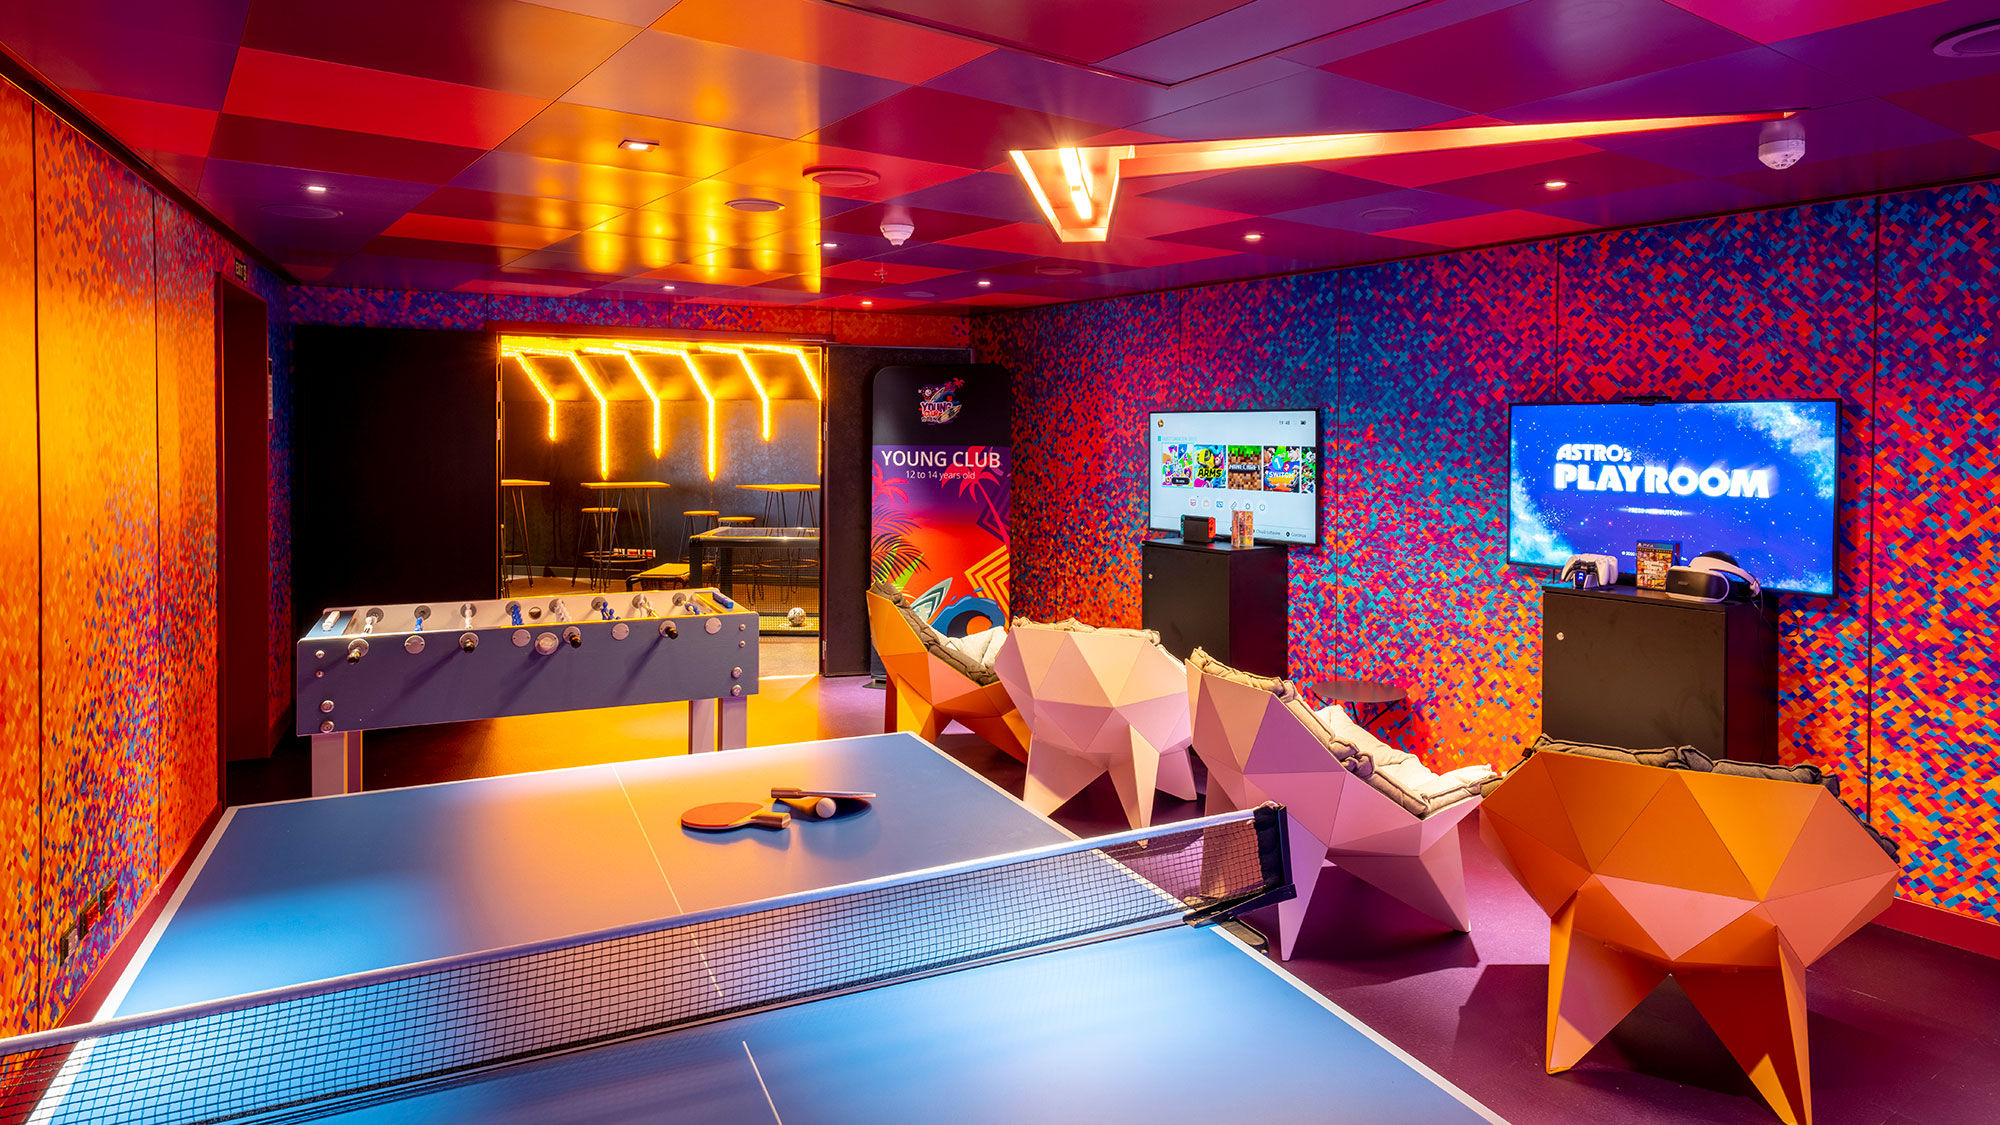 The MSC Seascape's Young Club will be one of the dedicated spaces for teens and tweens.